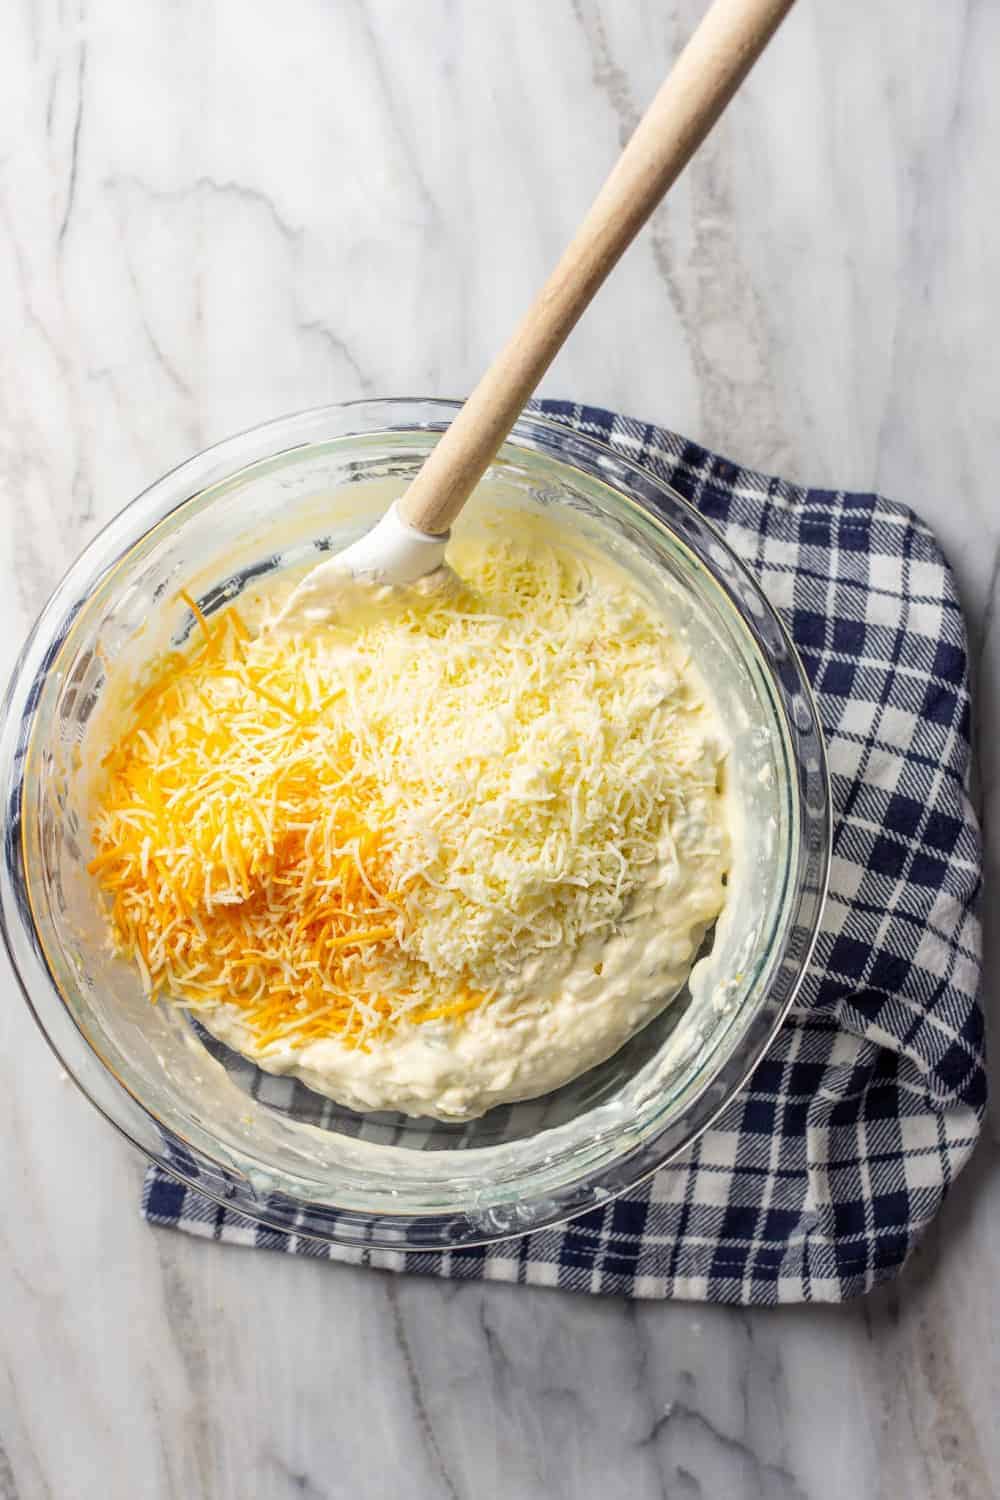 Spatula folding shredded cheese into jalapeno popper dip in a glass bowl